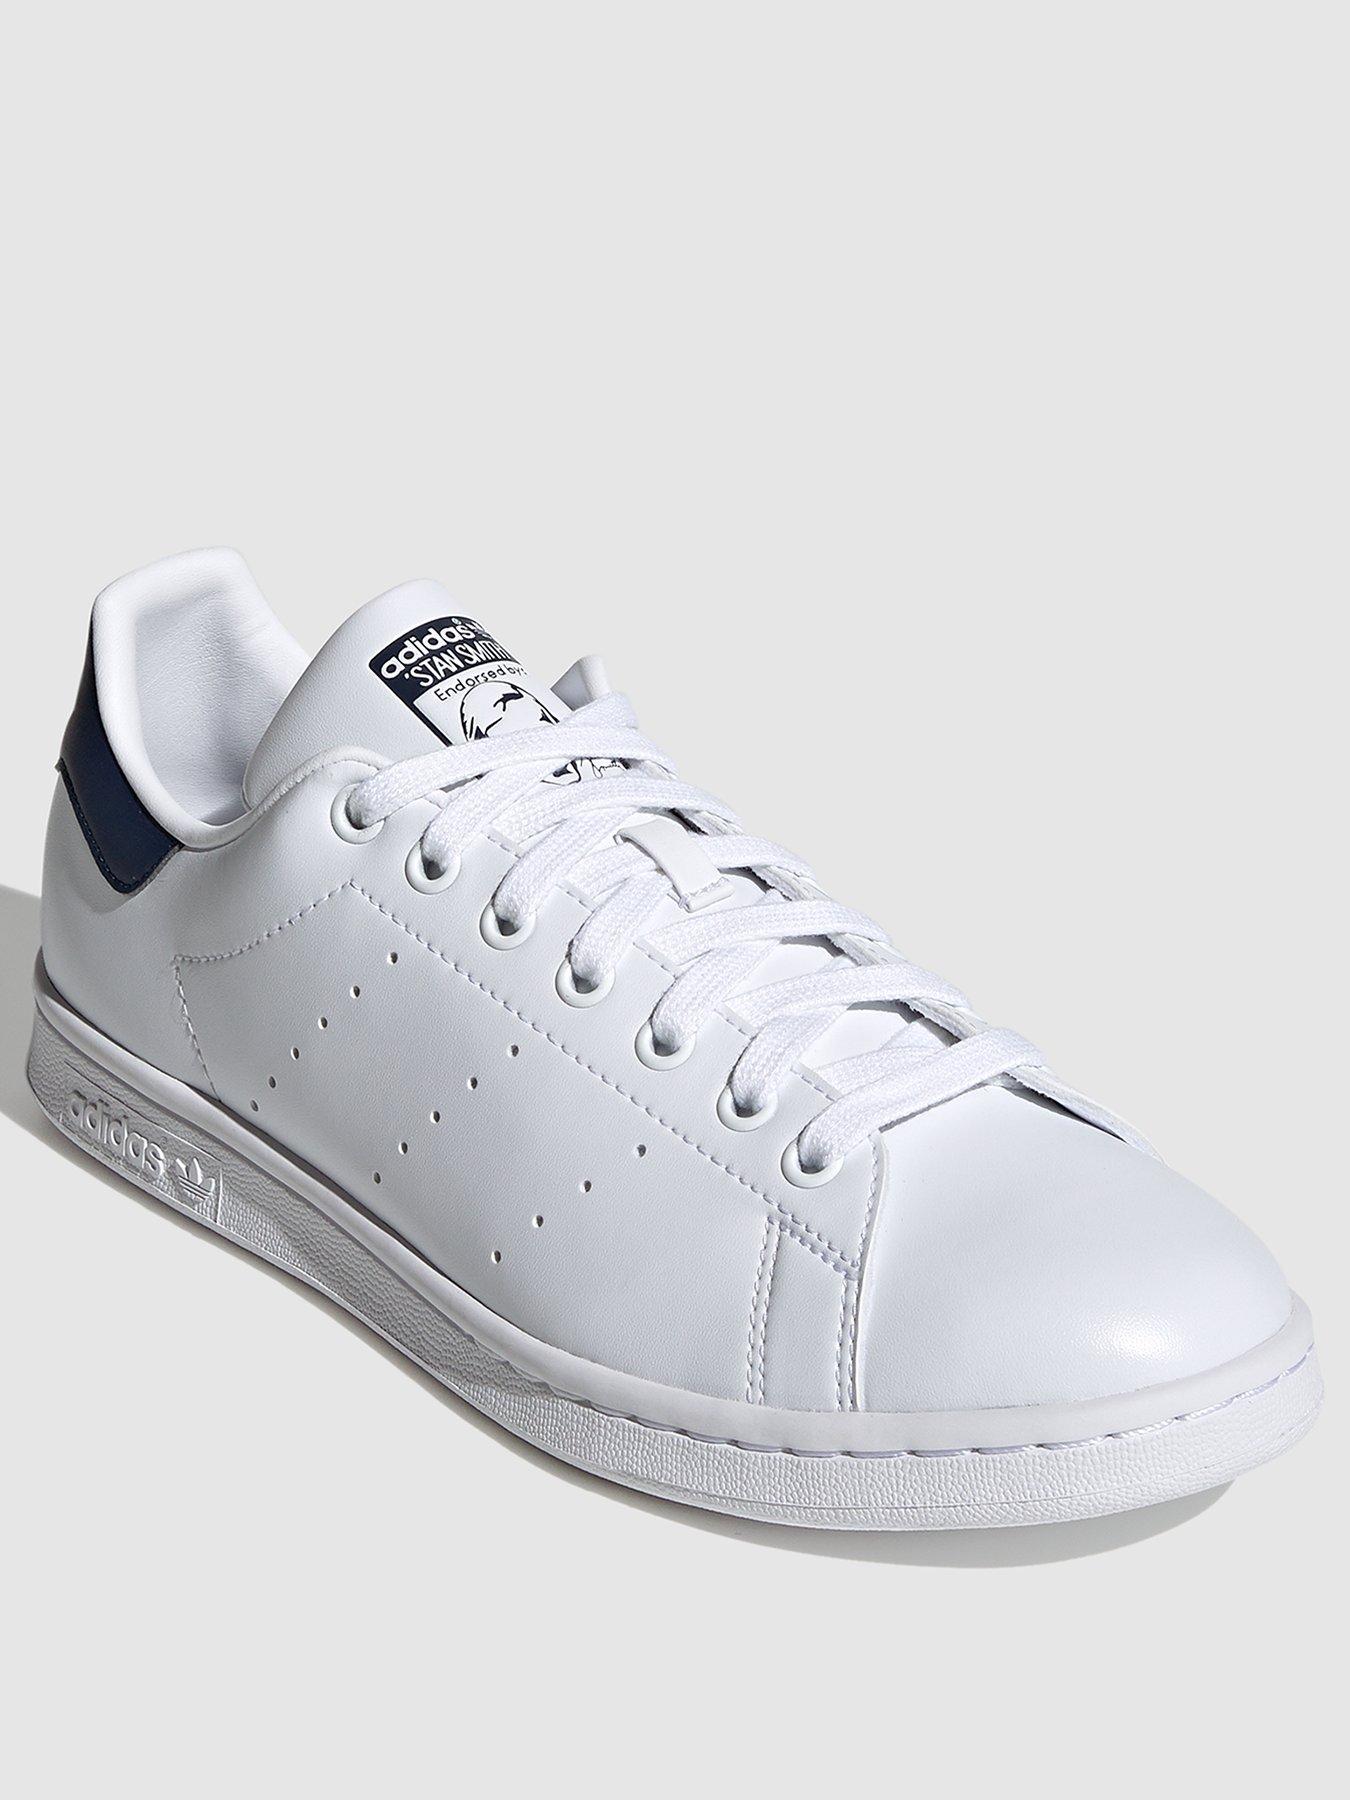 adidas Originals Stan Smith Trainers | very.co.uk